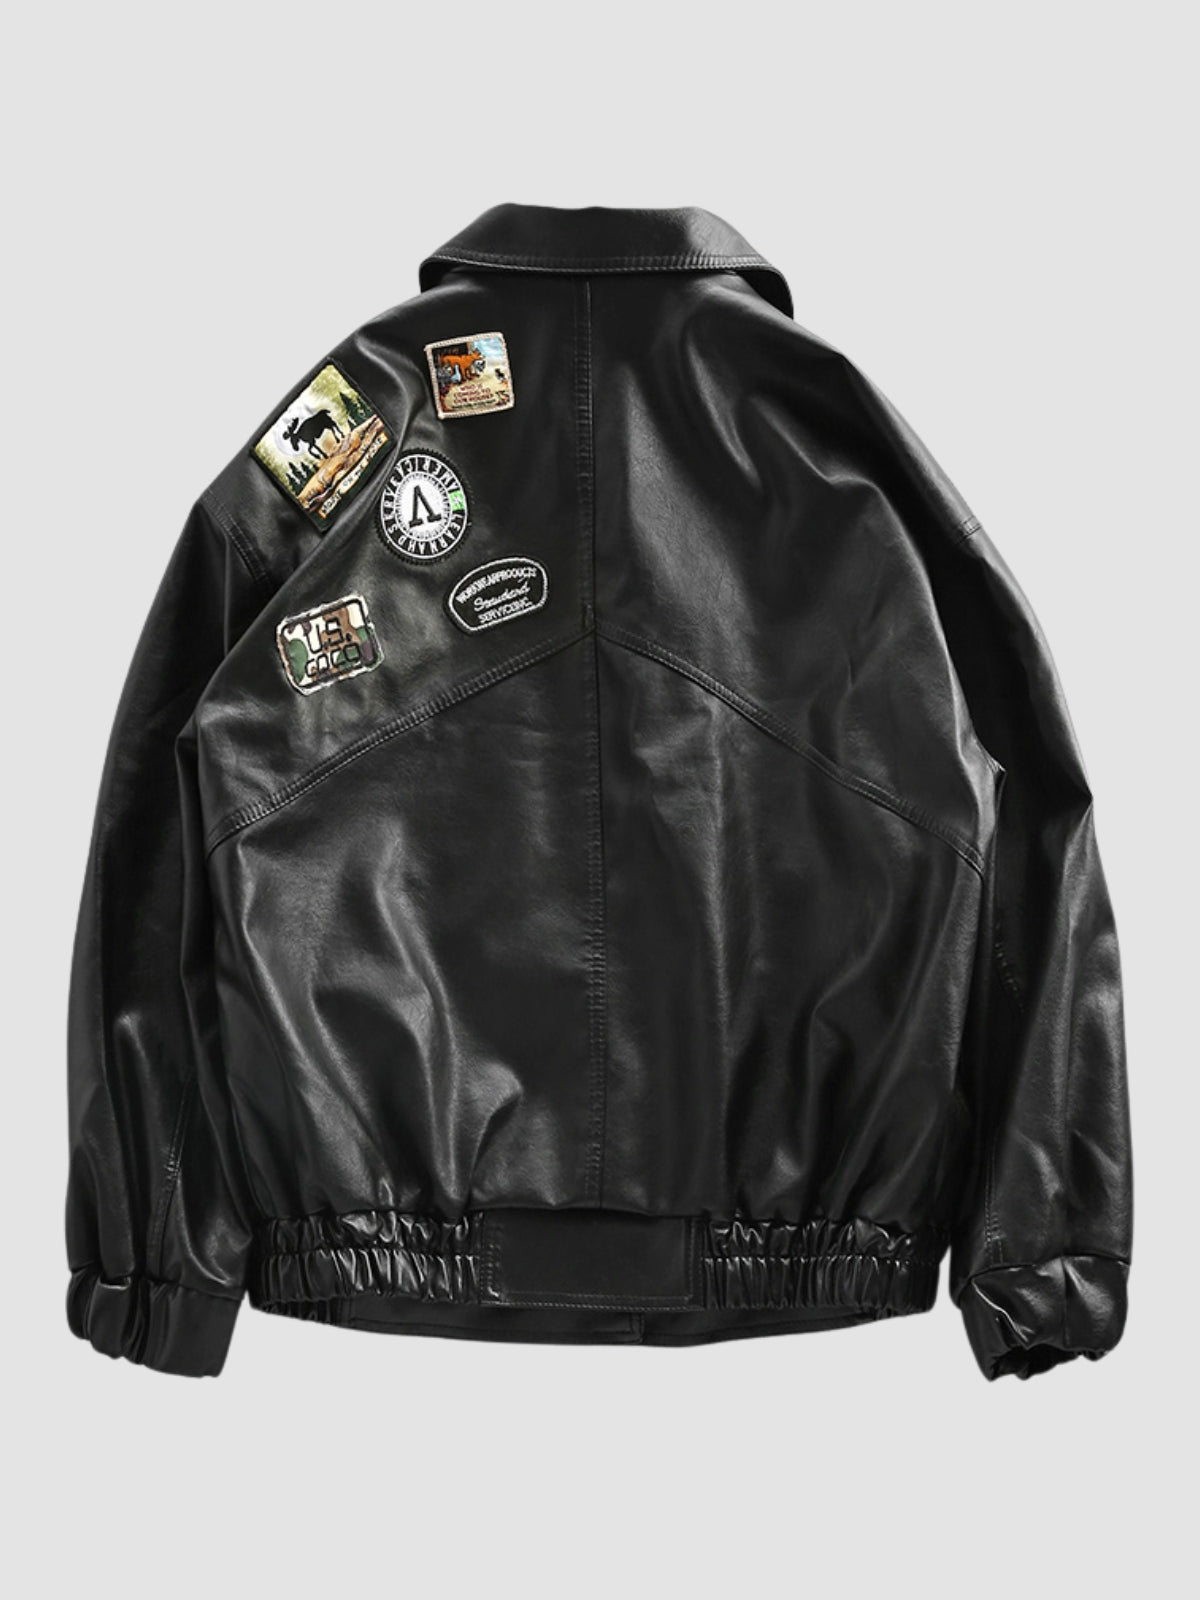 WLS Retro Loose Motorcycle Suit Embroidered Leather Jacket